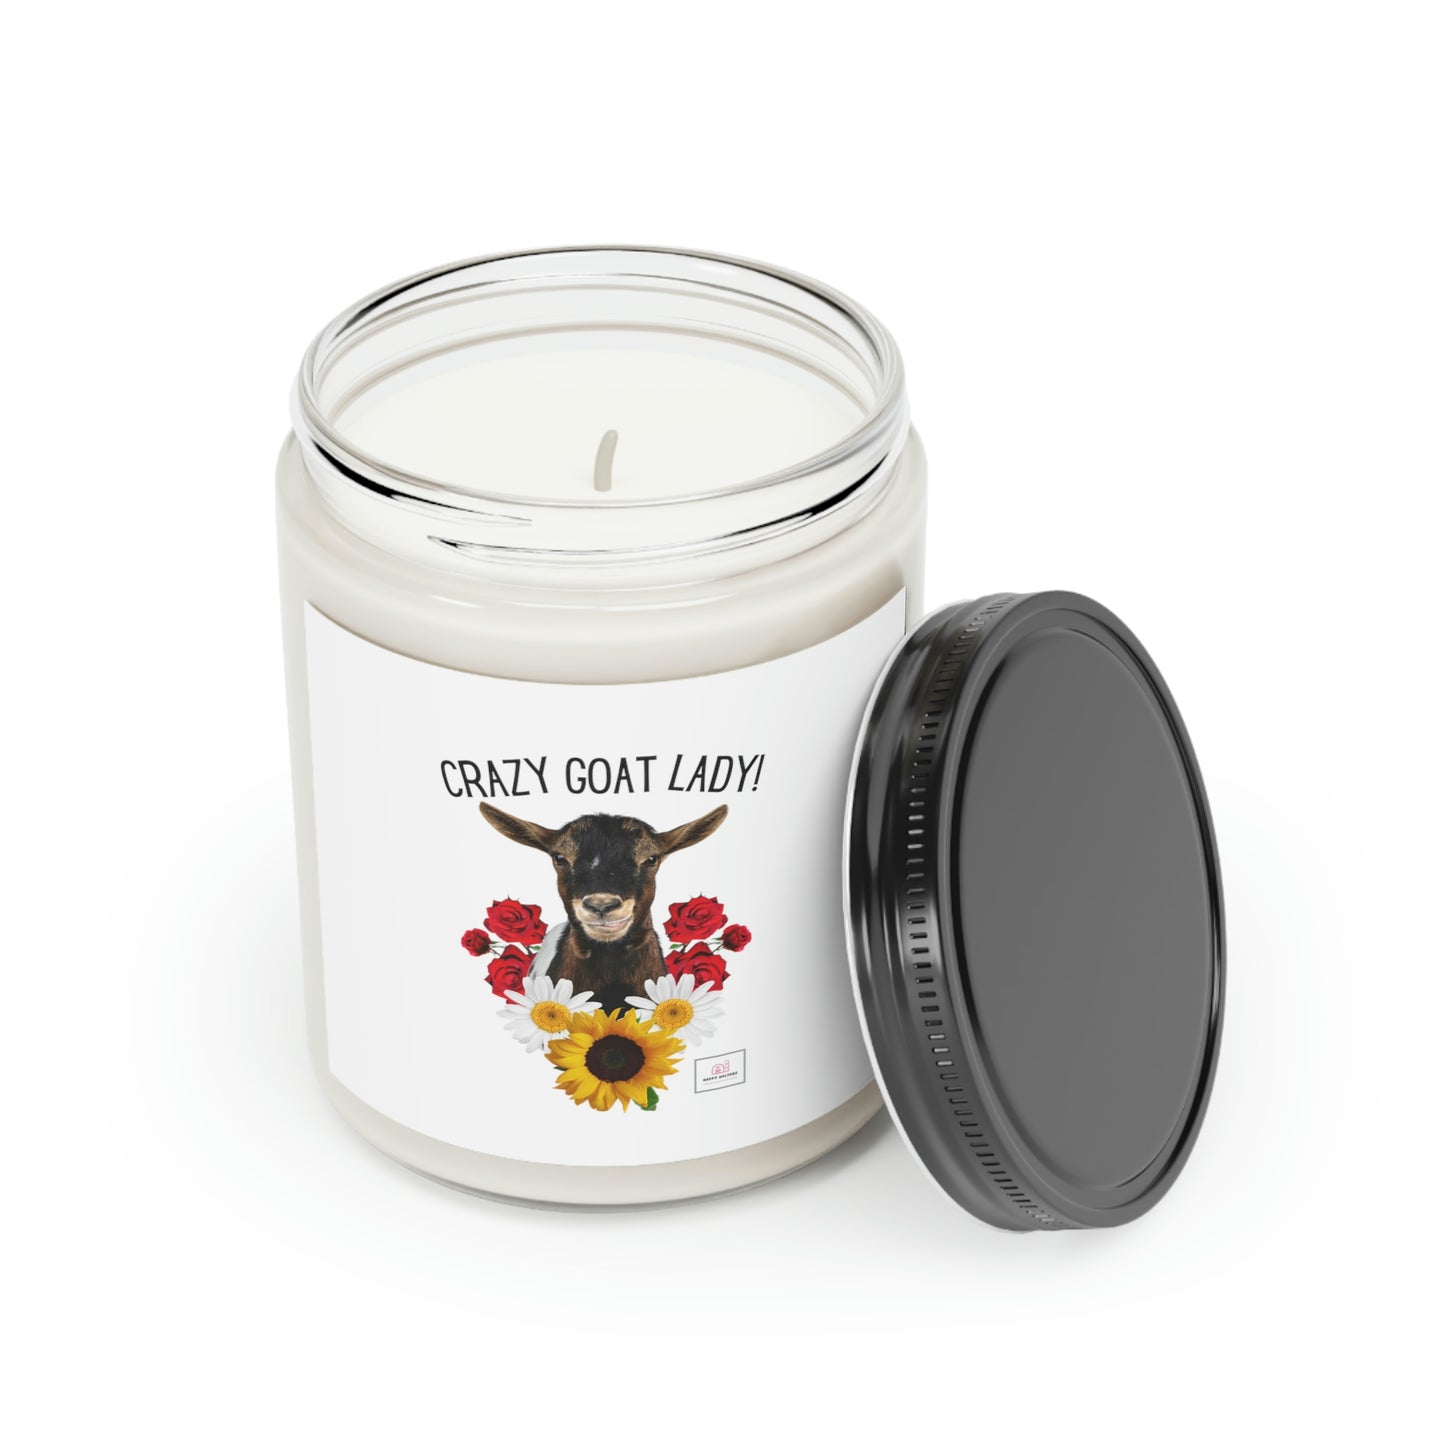 Crazy Goat Lady Scented Candle, 9oz